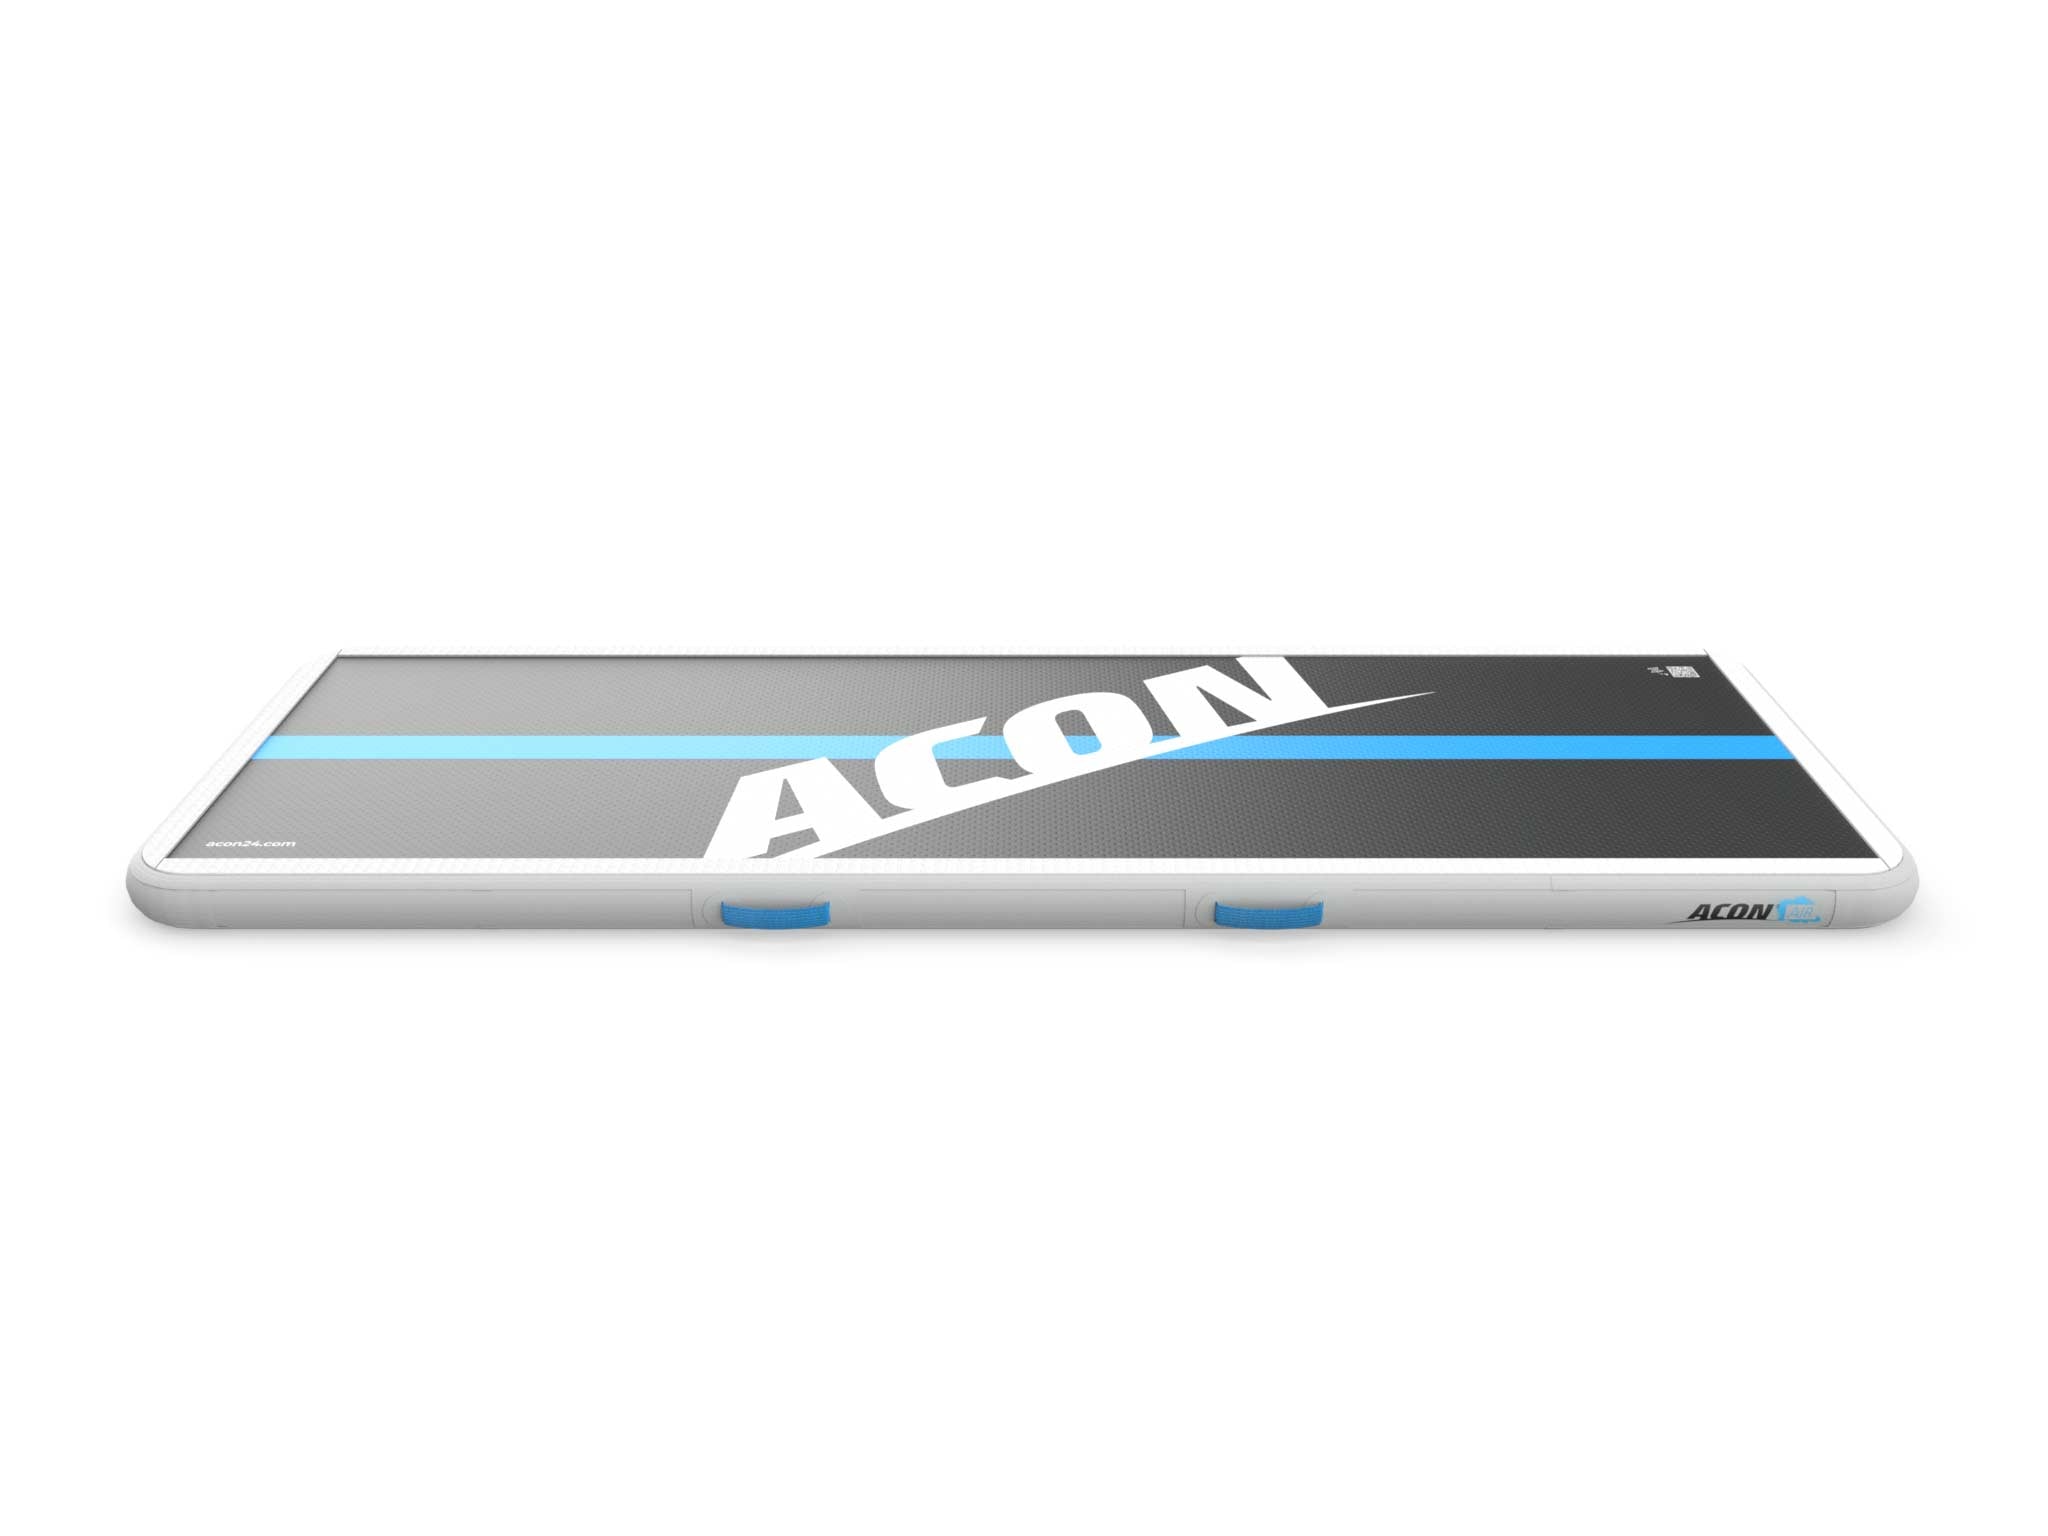 ACON AirTrack Tumbling Mat 10ft Limited Edition - us.acon24.com - from the side